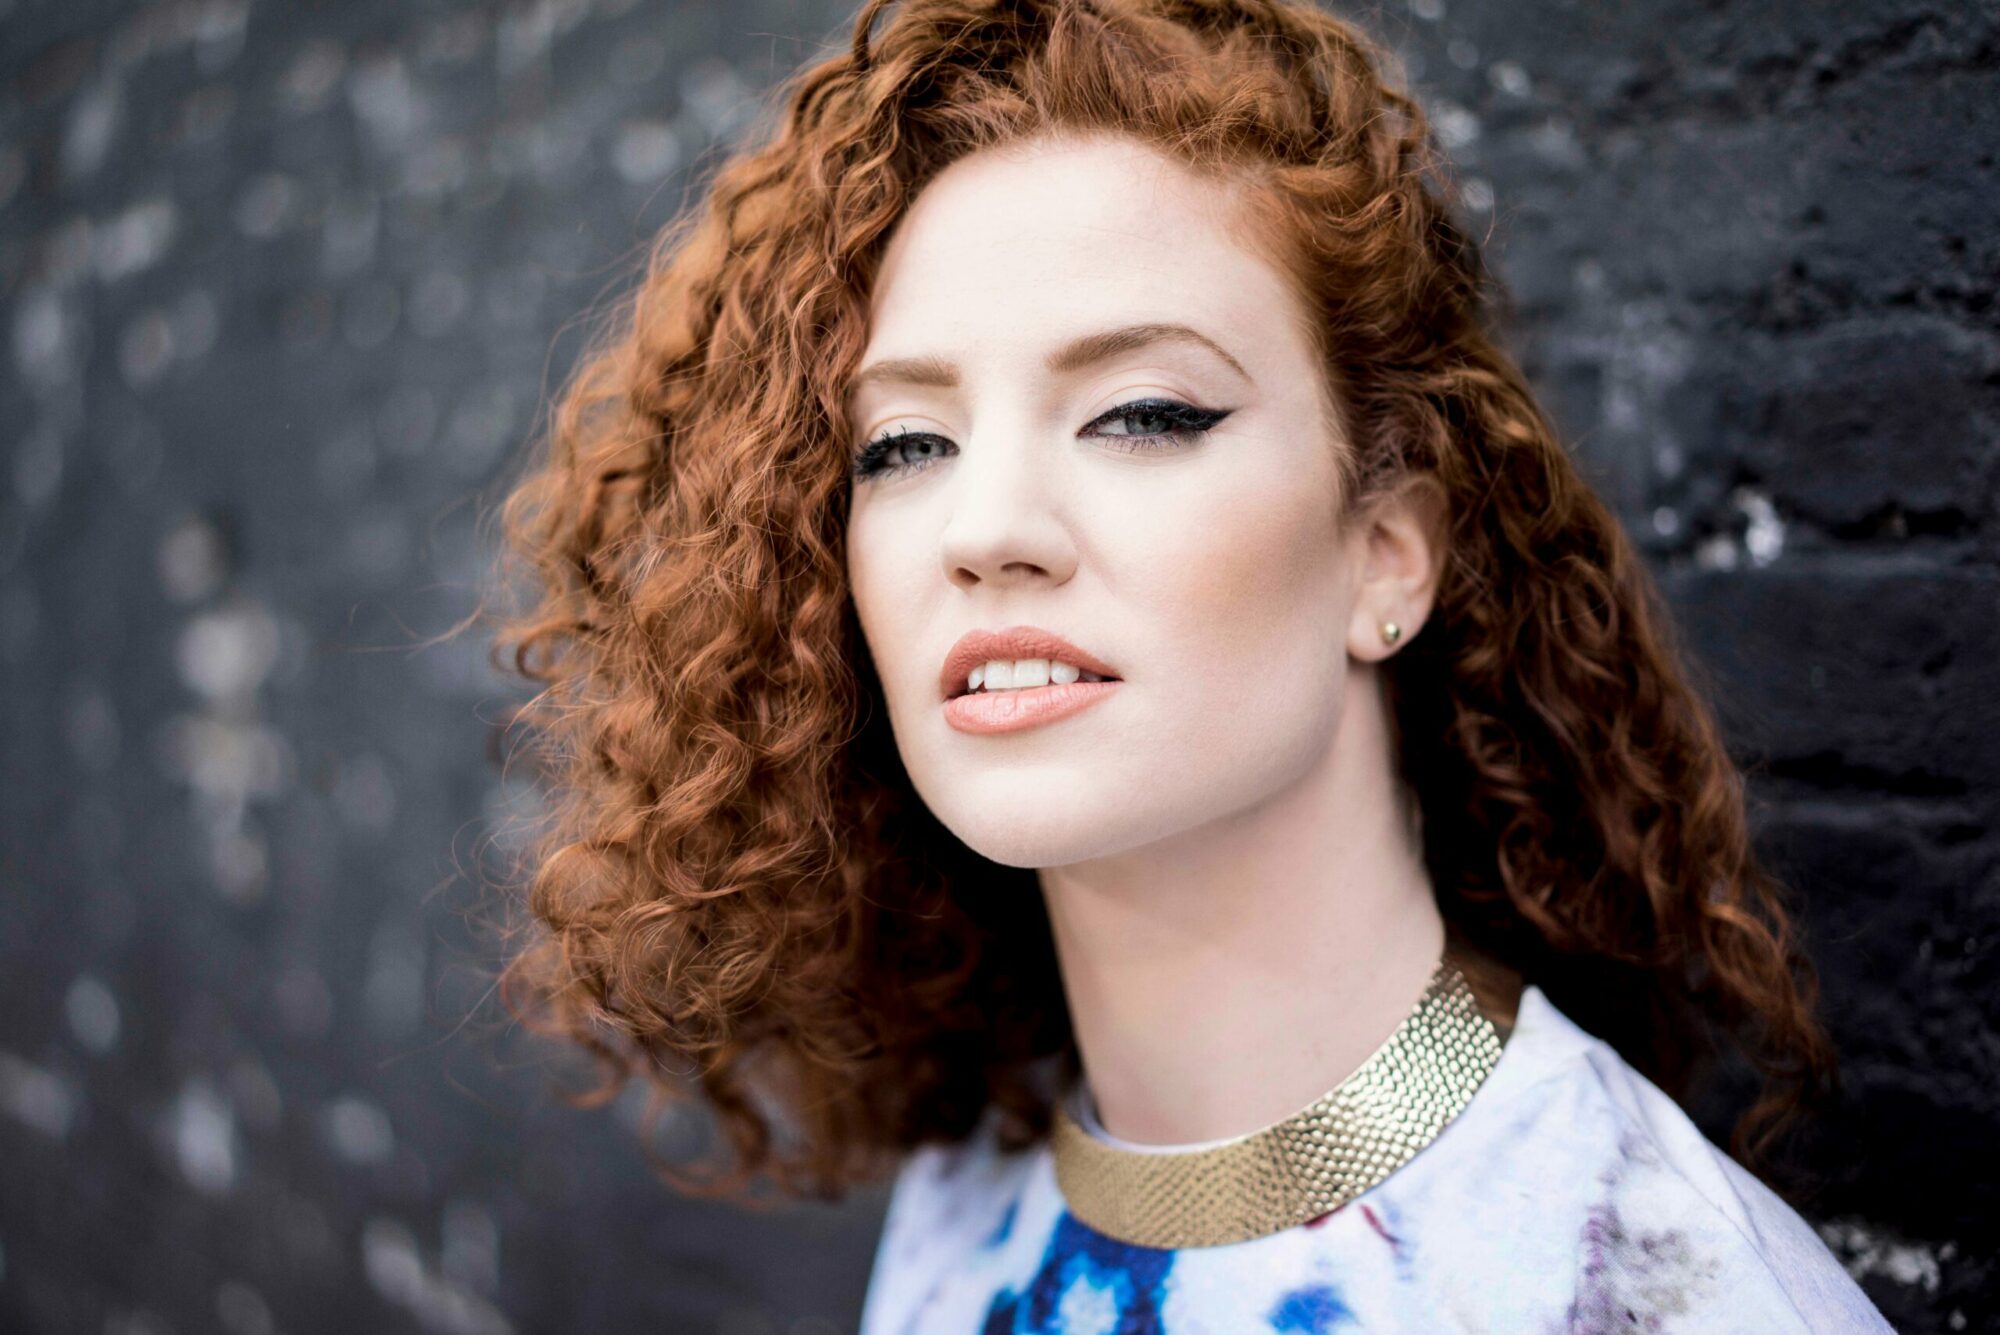 Image name Jess Glynne Official Ticket and Hotel Packages at Scarborough Open Air Theatre Scarborough scaled the 12 image from the post Jess Glynne- Official Ticket and Hotel Packages at The Piece Hall, Halifax in Yorkshire.com.